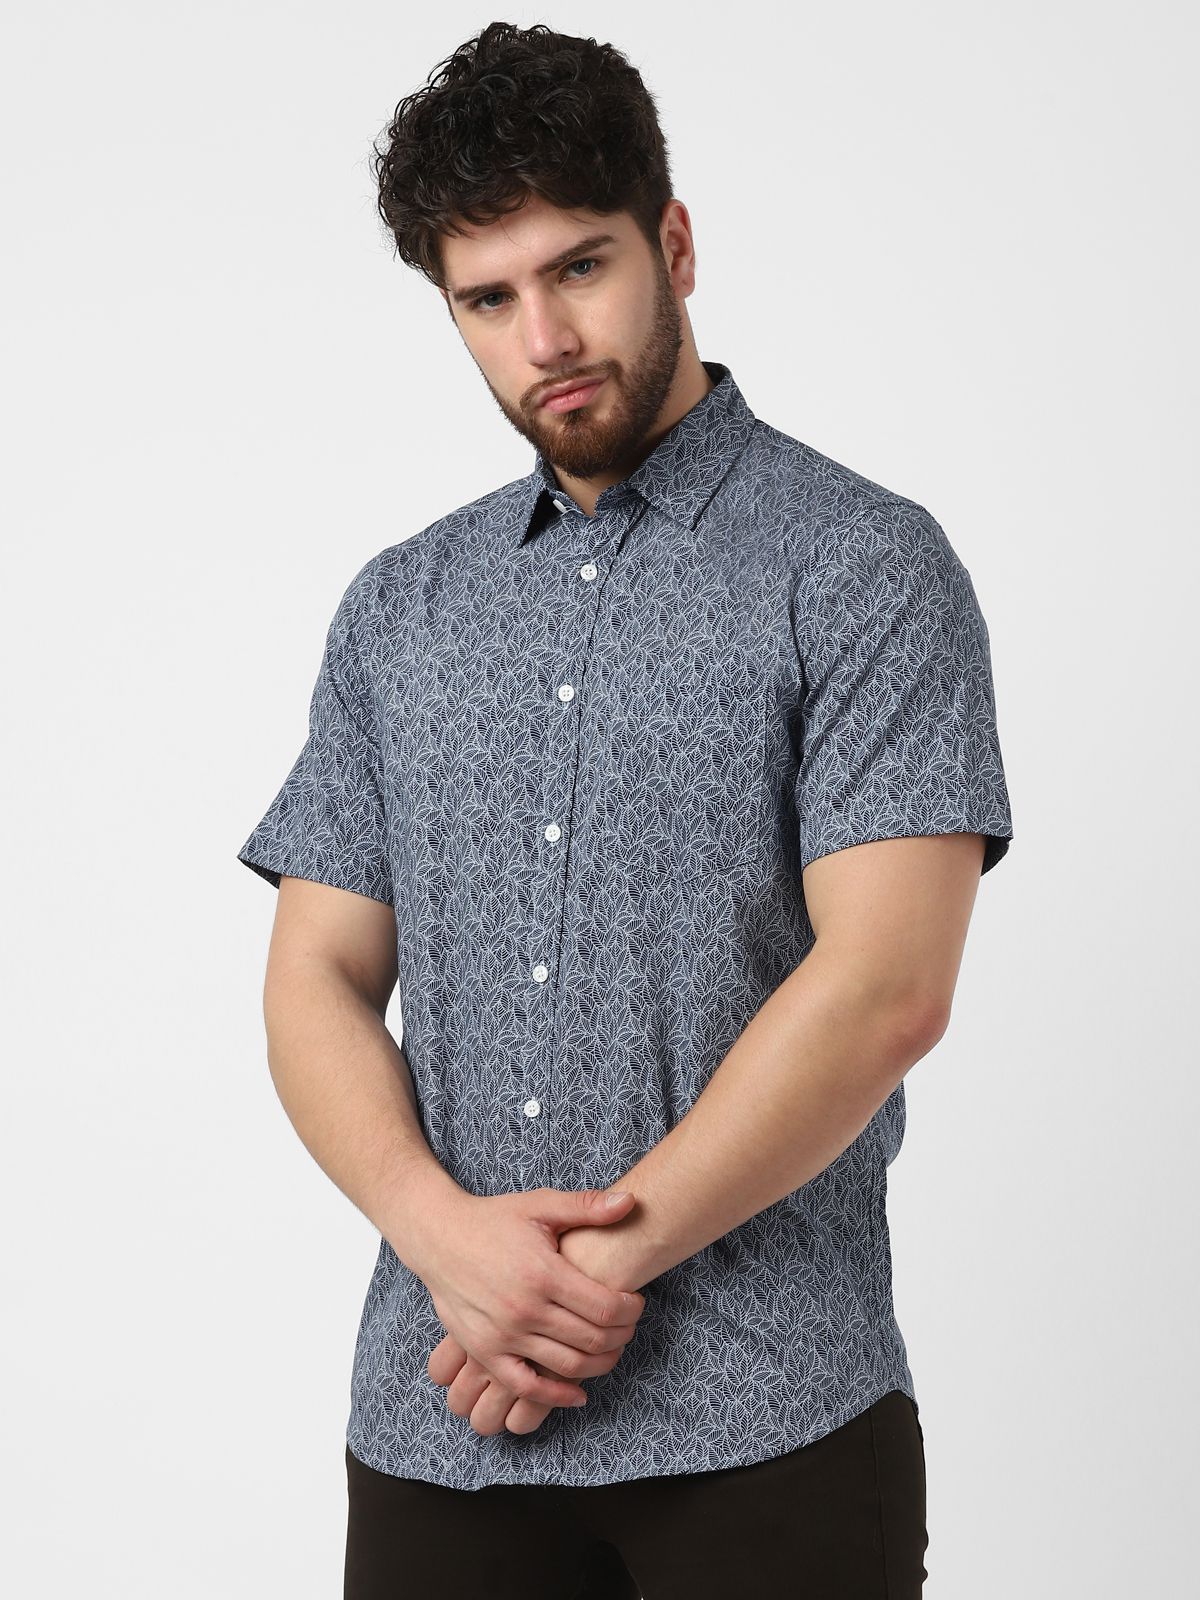 UrbanMark Men 100% Cotton Half Sleeves Slim Fit All Over Printed Casual Shirt-Navy